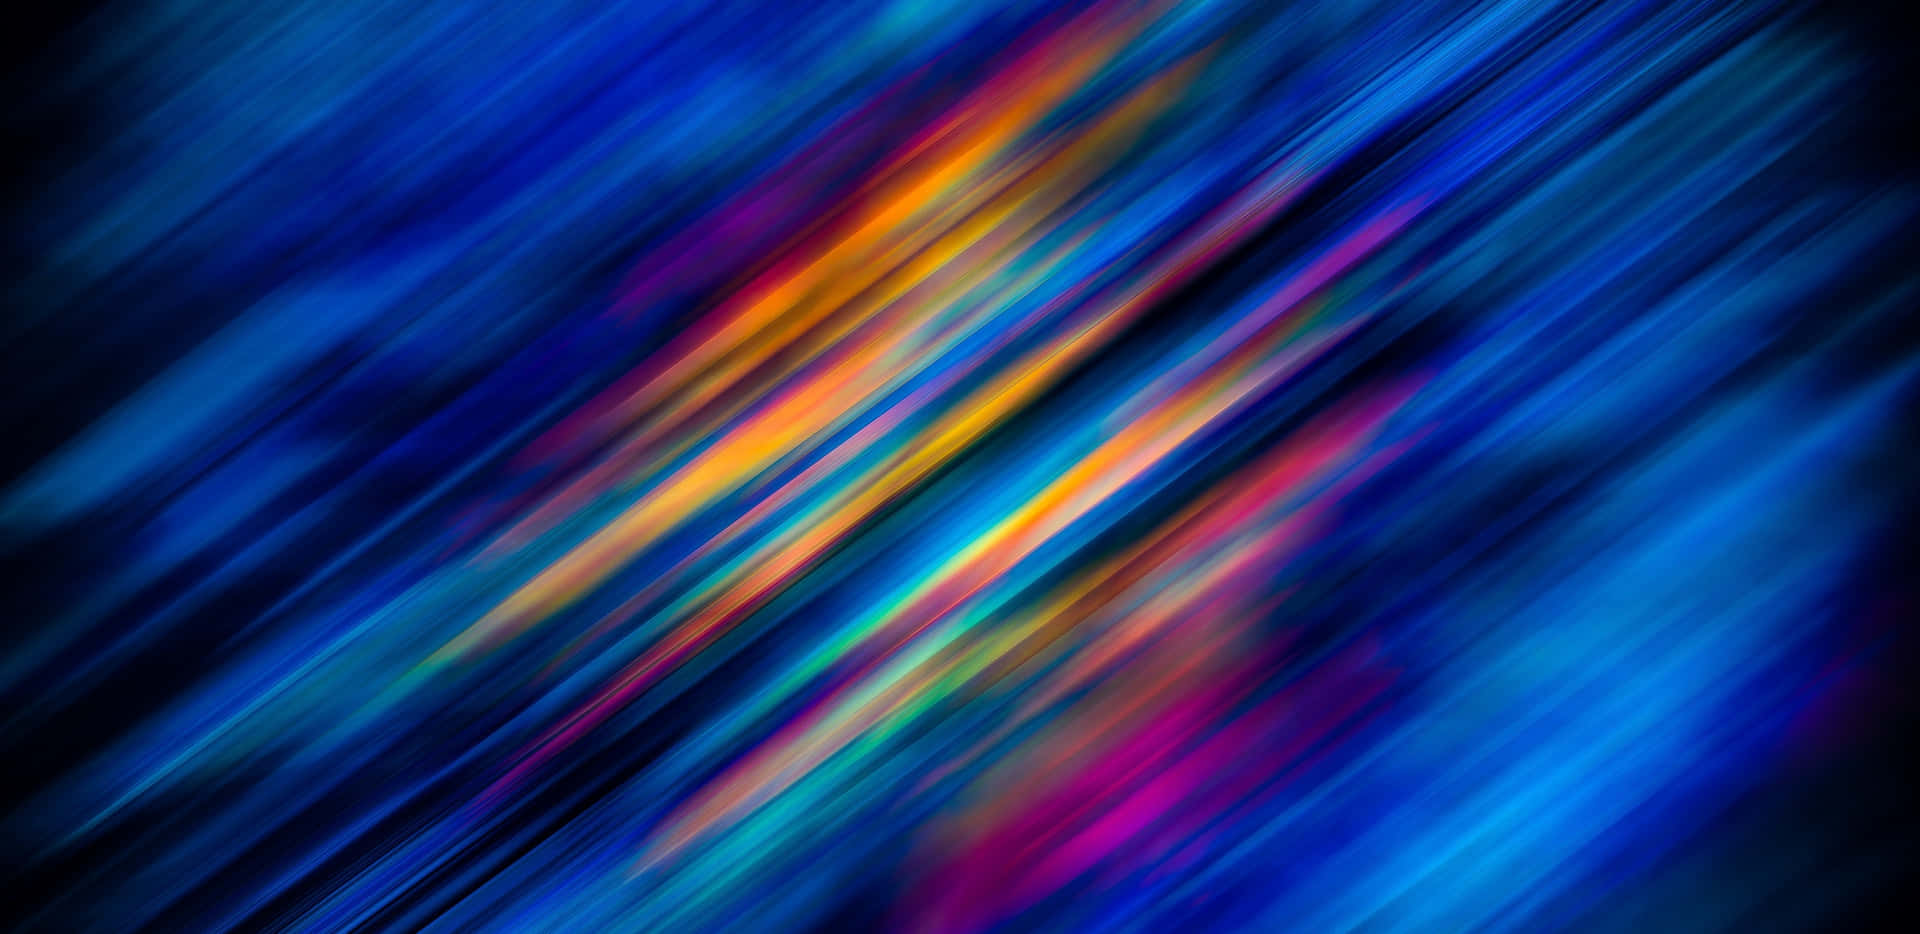 Abstract Blue And Yellow Lines On A Black Background